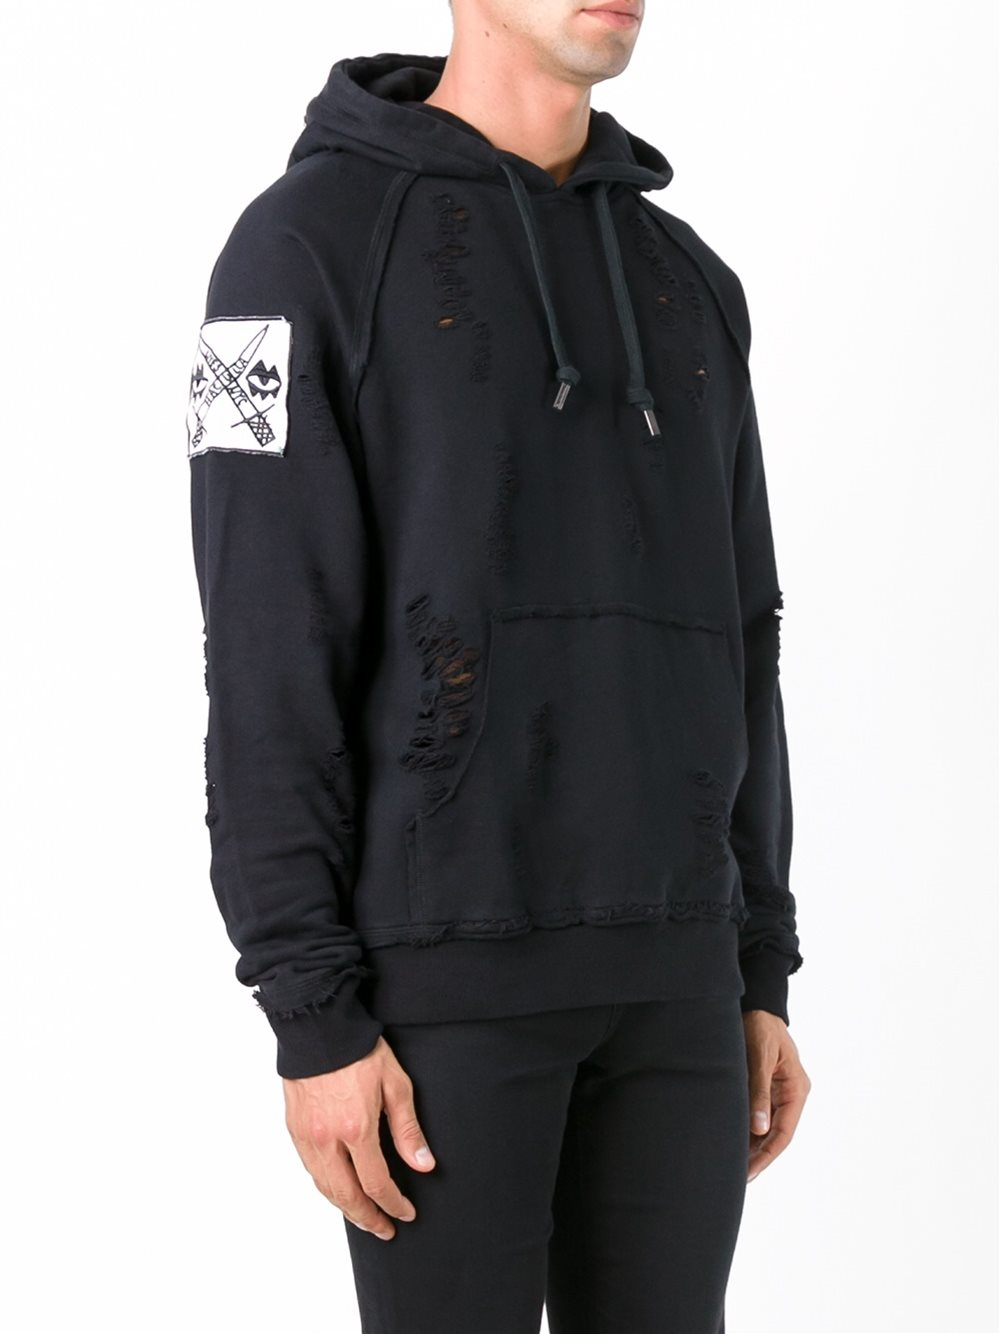 Haculla Arm Patch Ripped Hoodie in Black for Men - Lyst